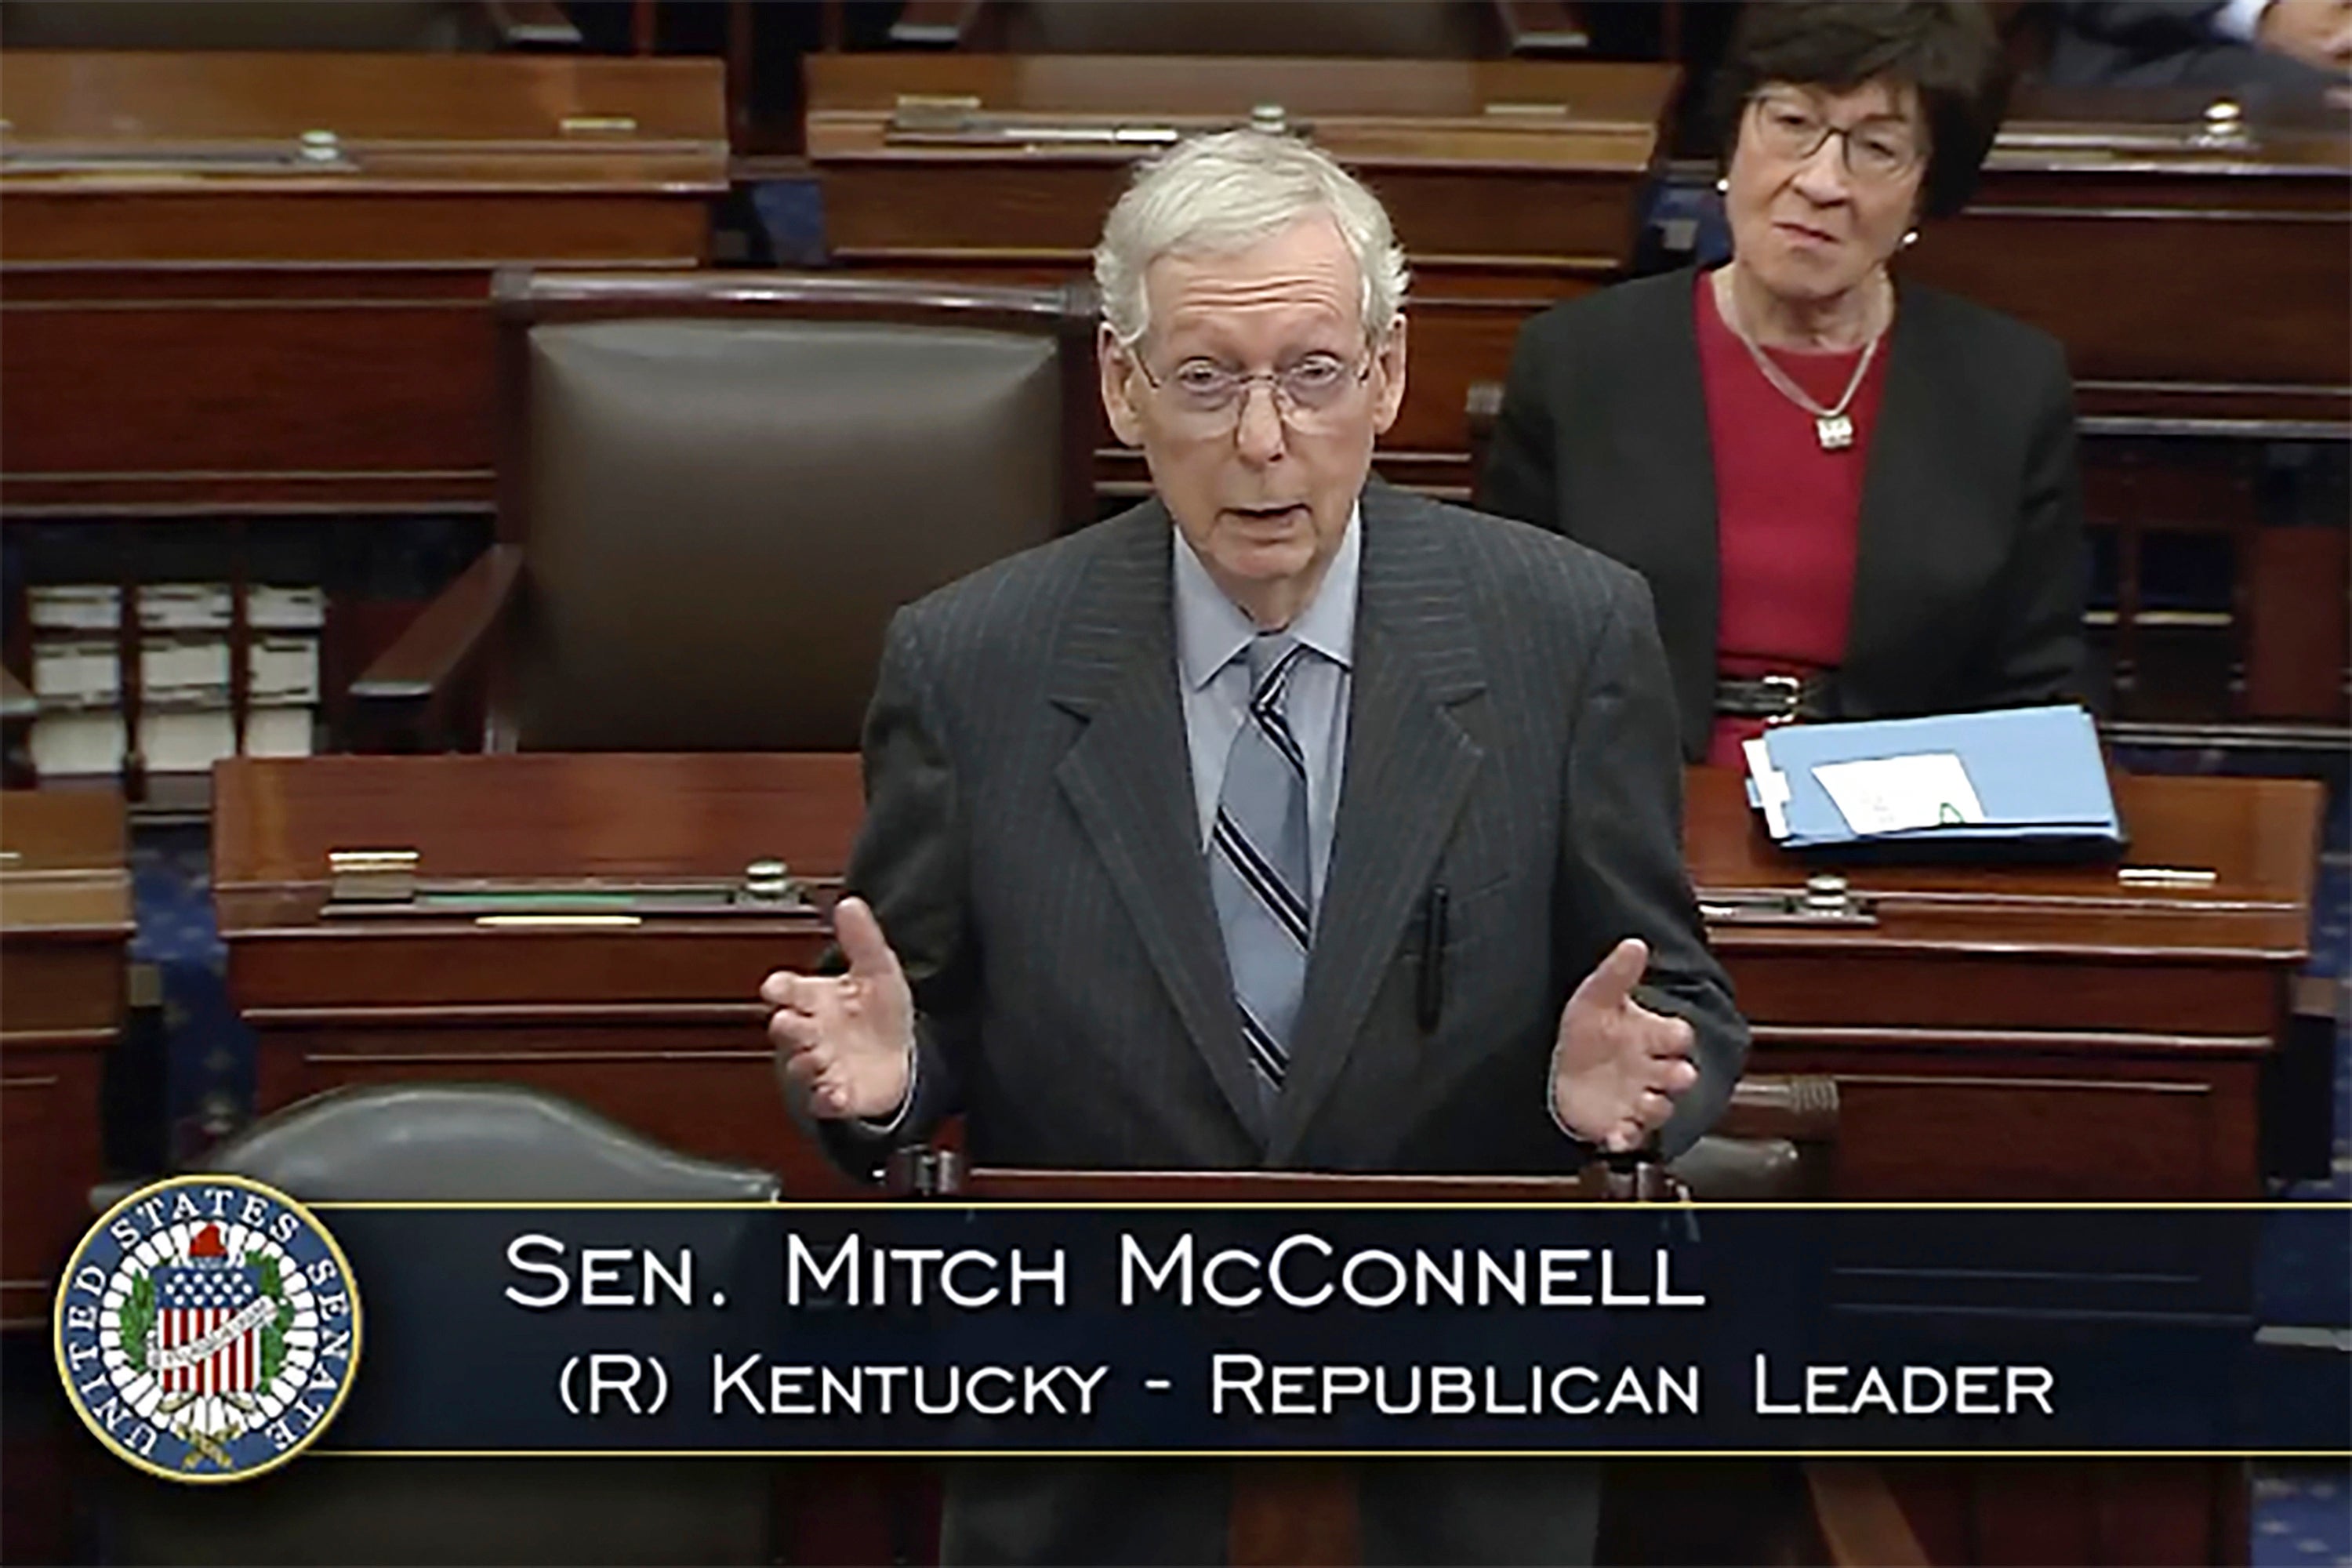 Mr McConnell speaking on the Senate floor, and telling his colleagues he’ll step down in November